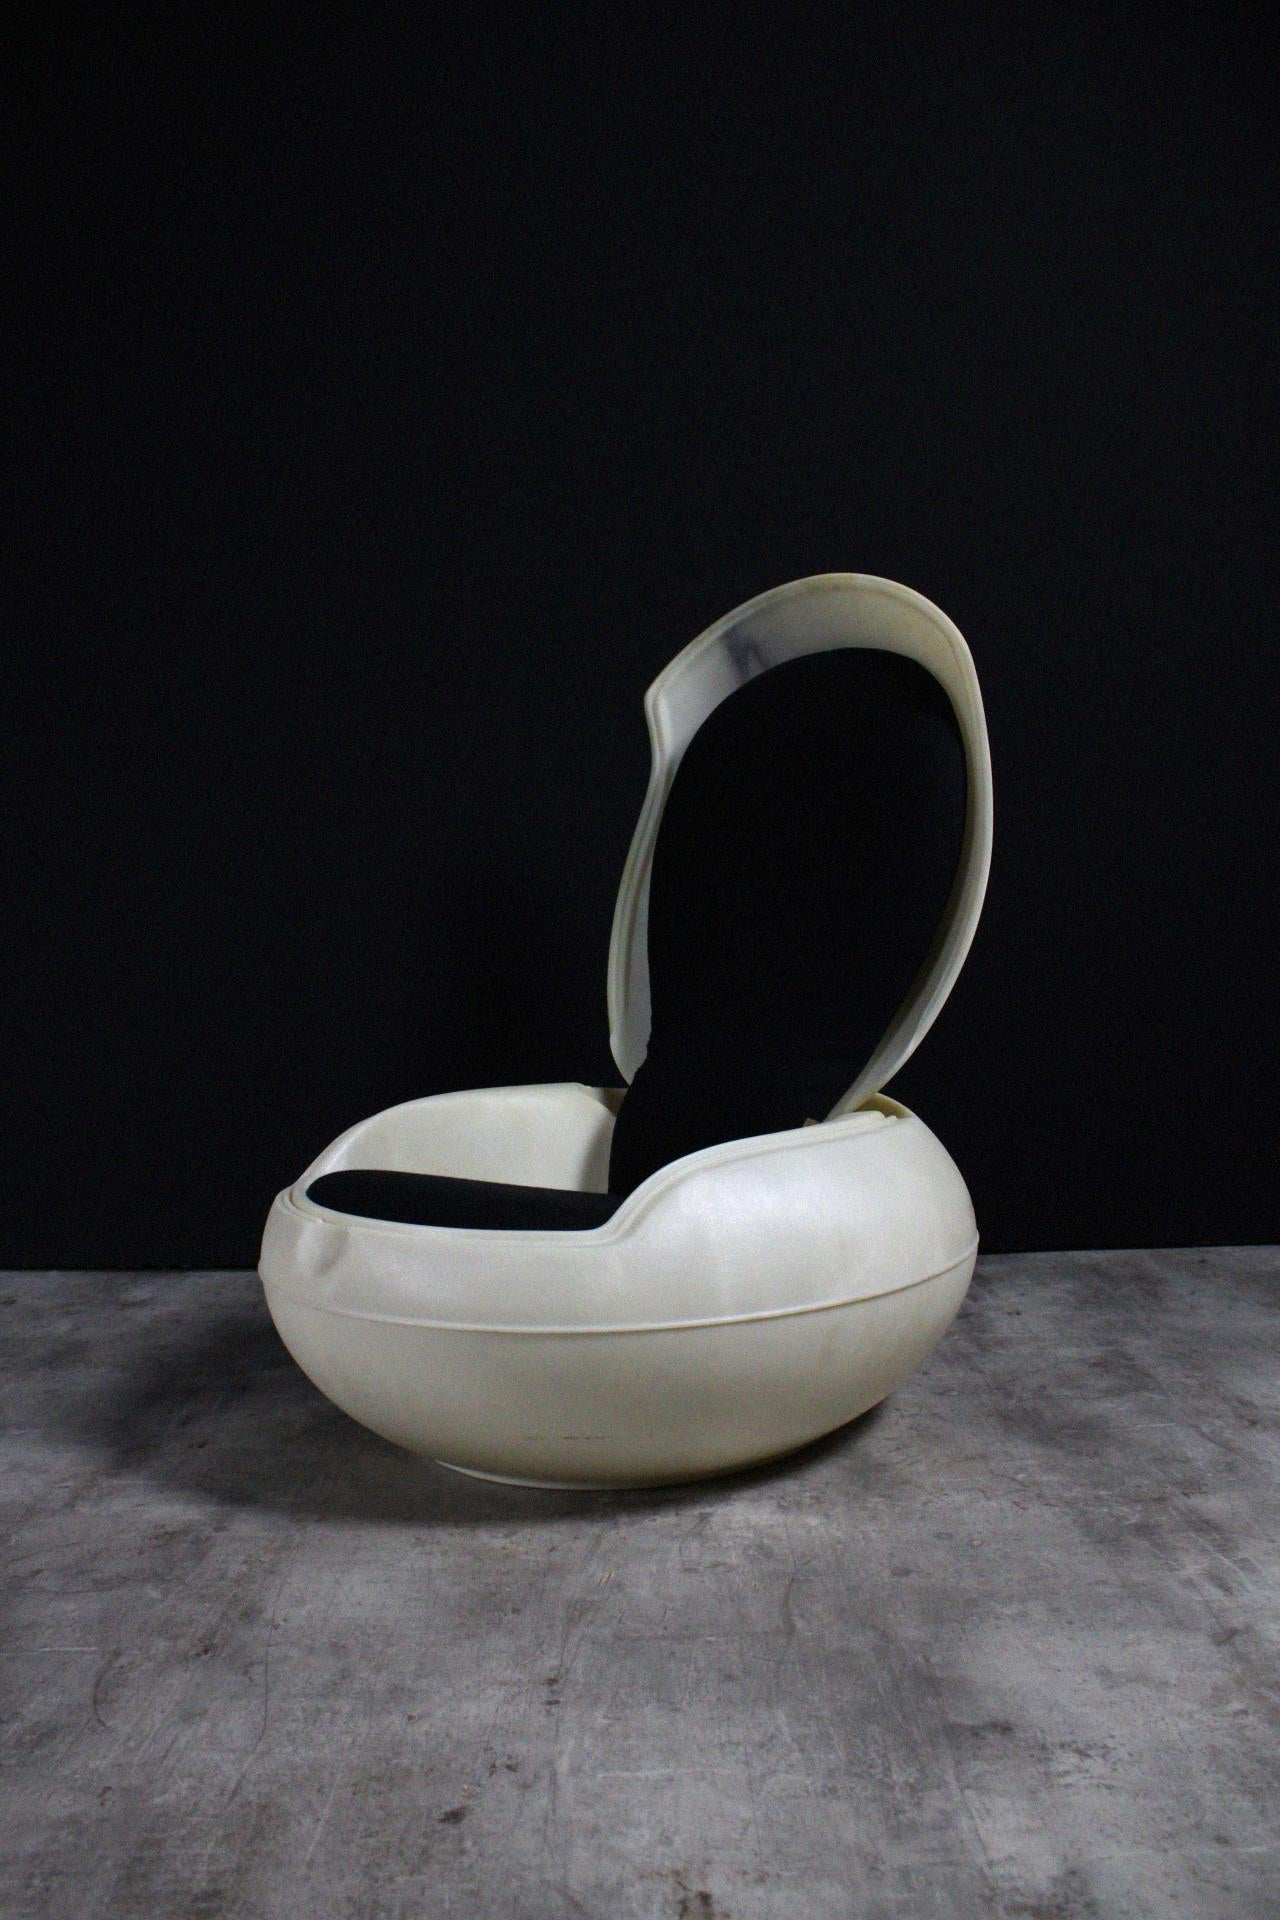 The Garden Egg Chair is one of Peter Ghyczy's best known design pieces. It is a true Space Age icon familiar to many. Peter Ghyczy designed and produced the Egg Chair in 1968 of which these signed 90's models exists in a small edition, with black